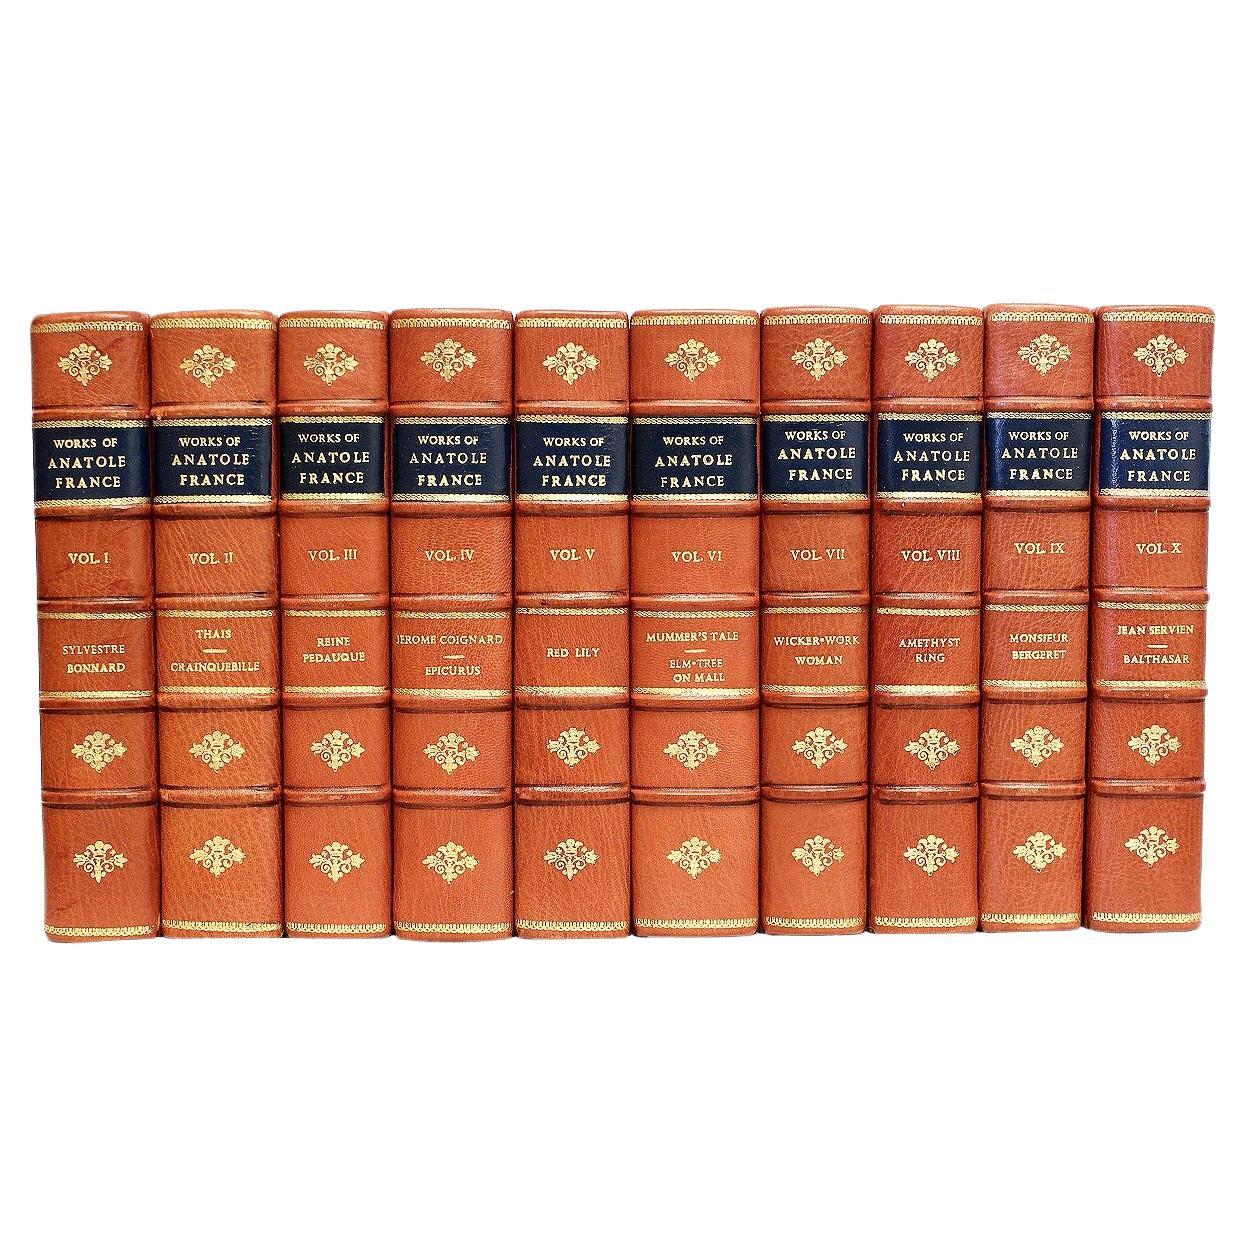 Autograph Edition of the Works of Anatole France, in a Fine Leather Binding!